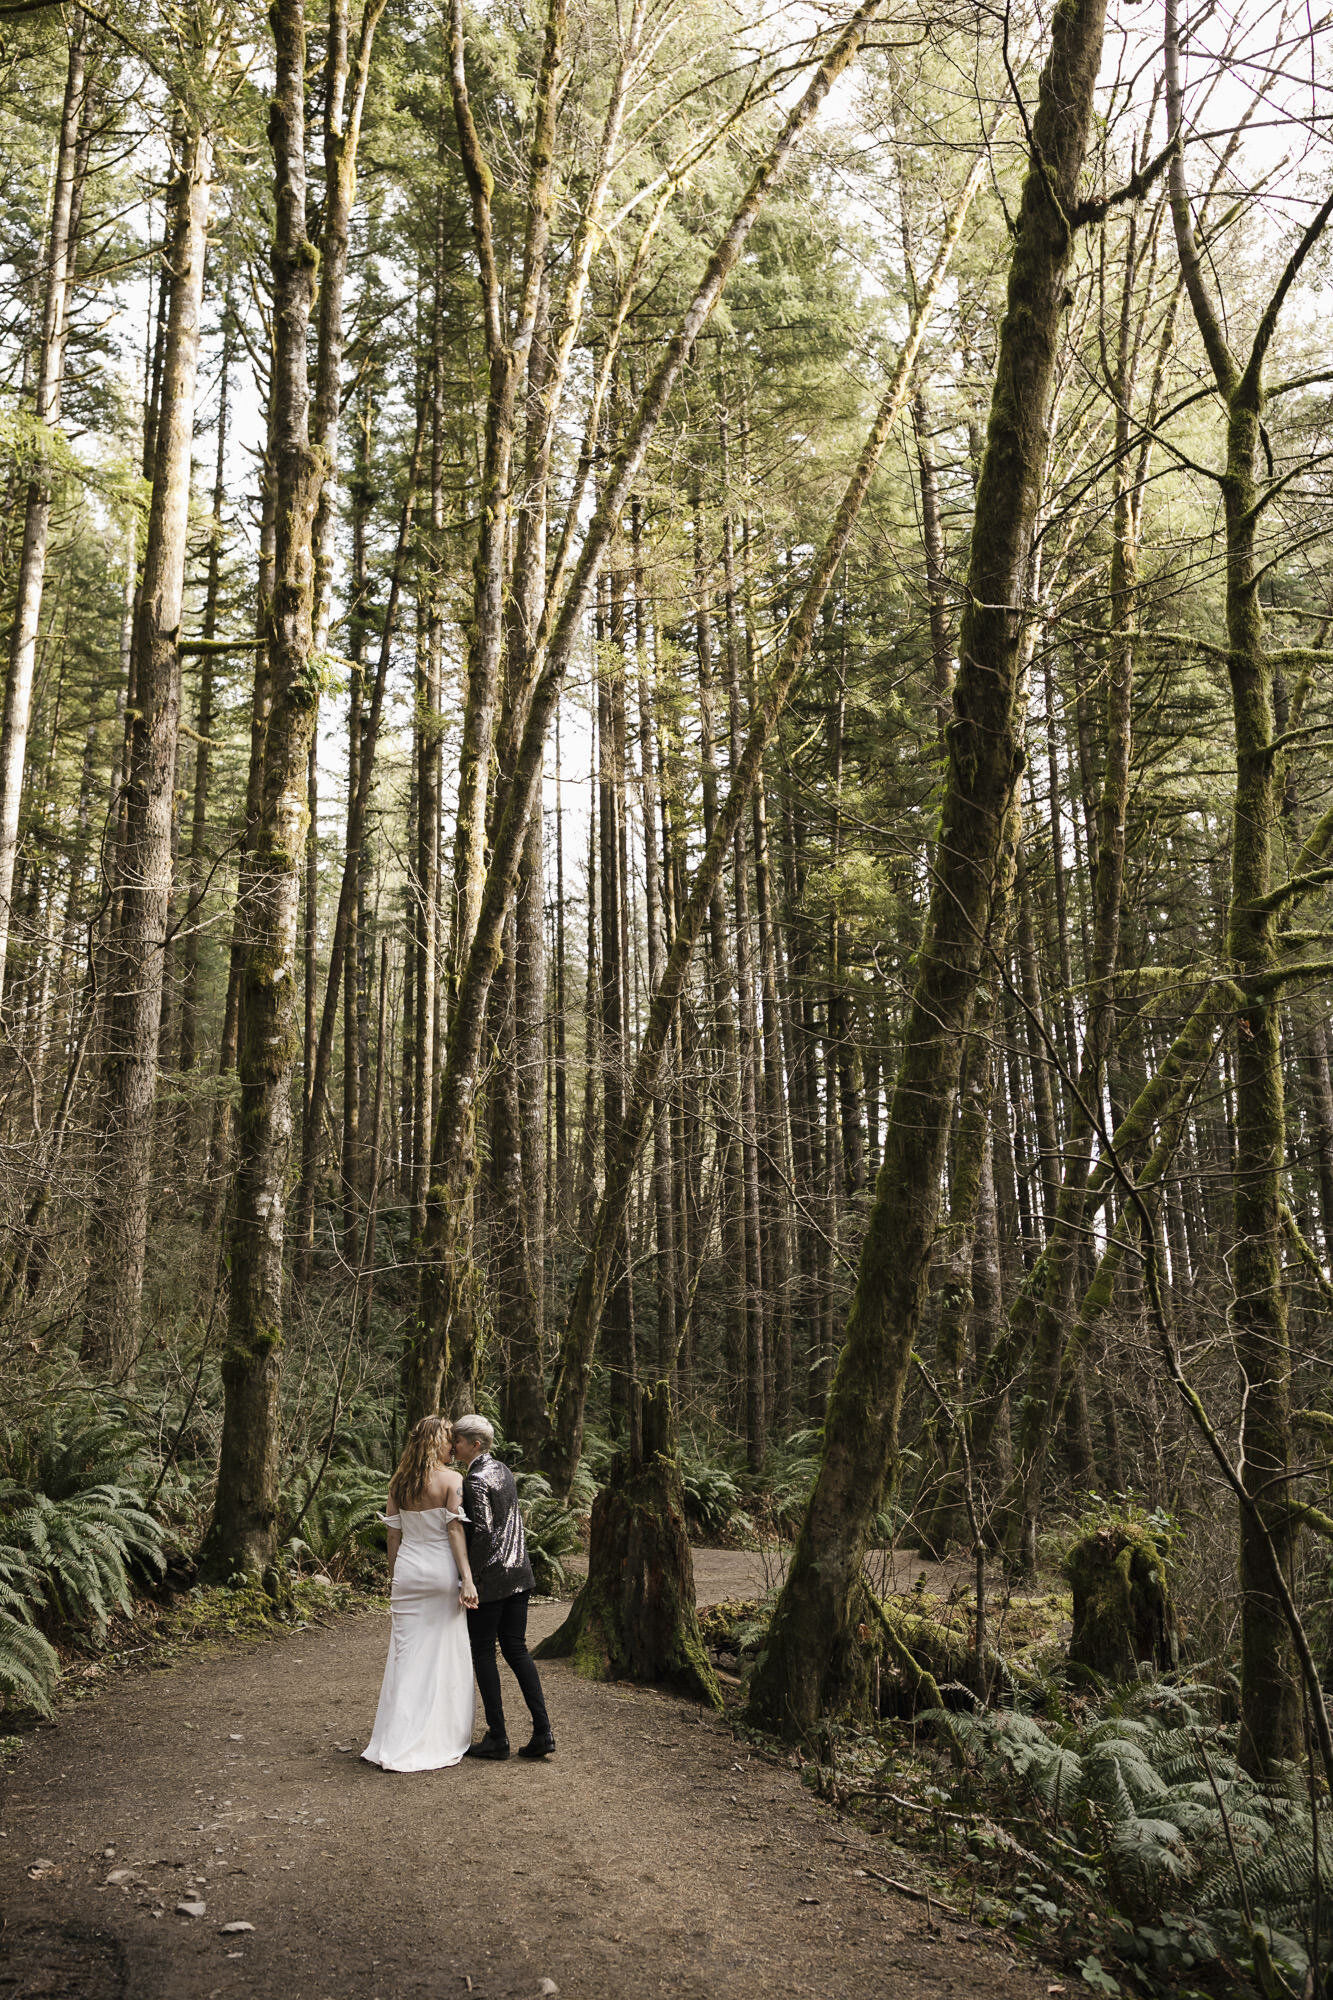 Wedding couple hike through a forest in Washington for their elopement